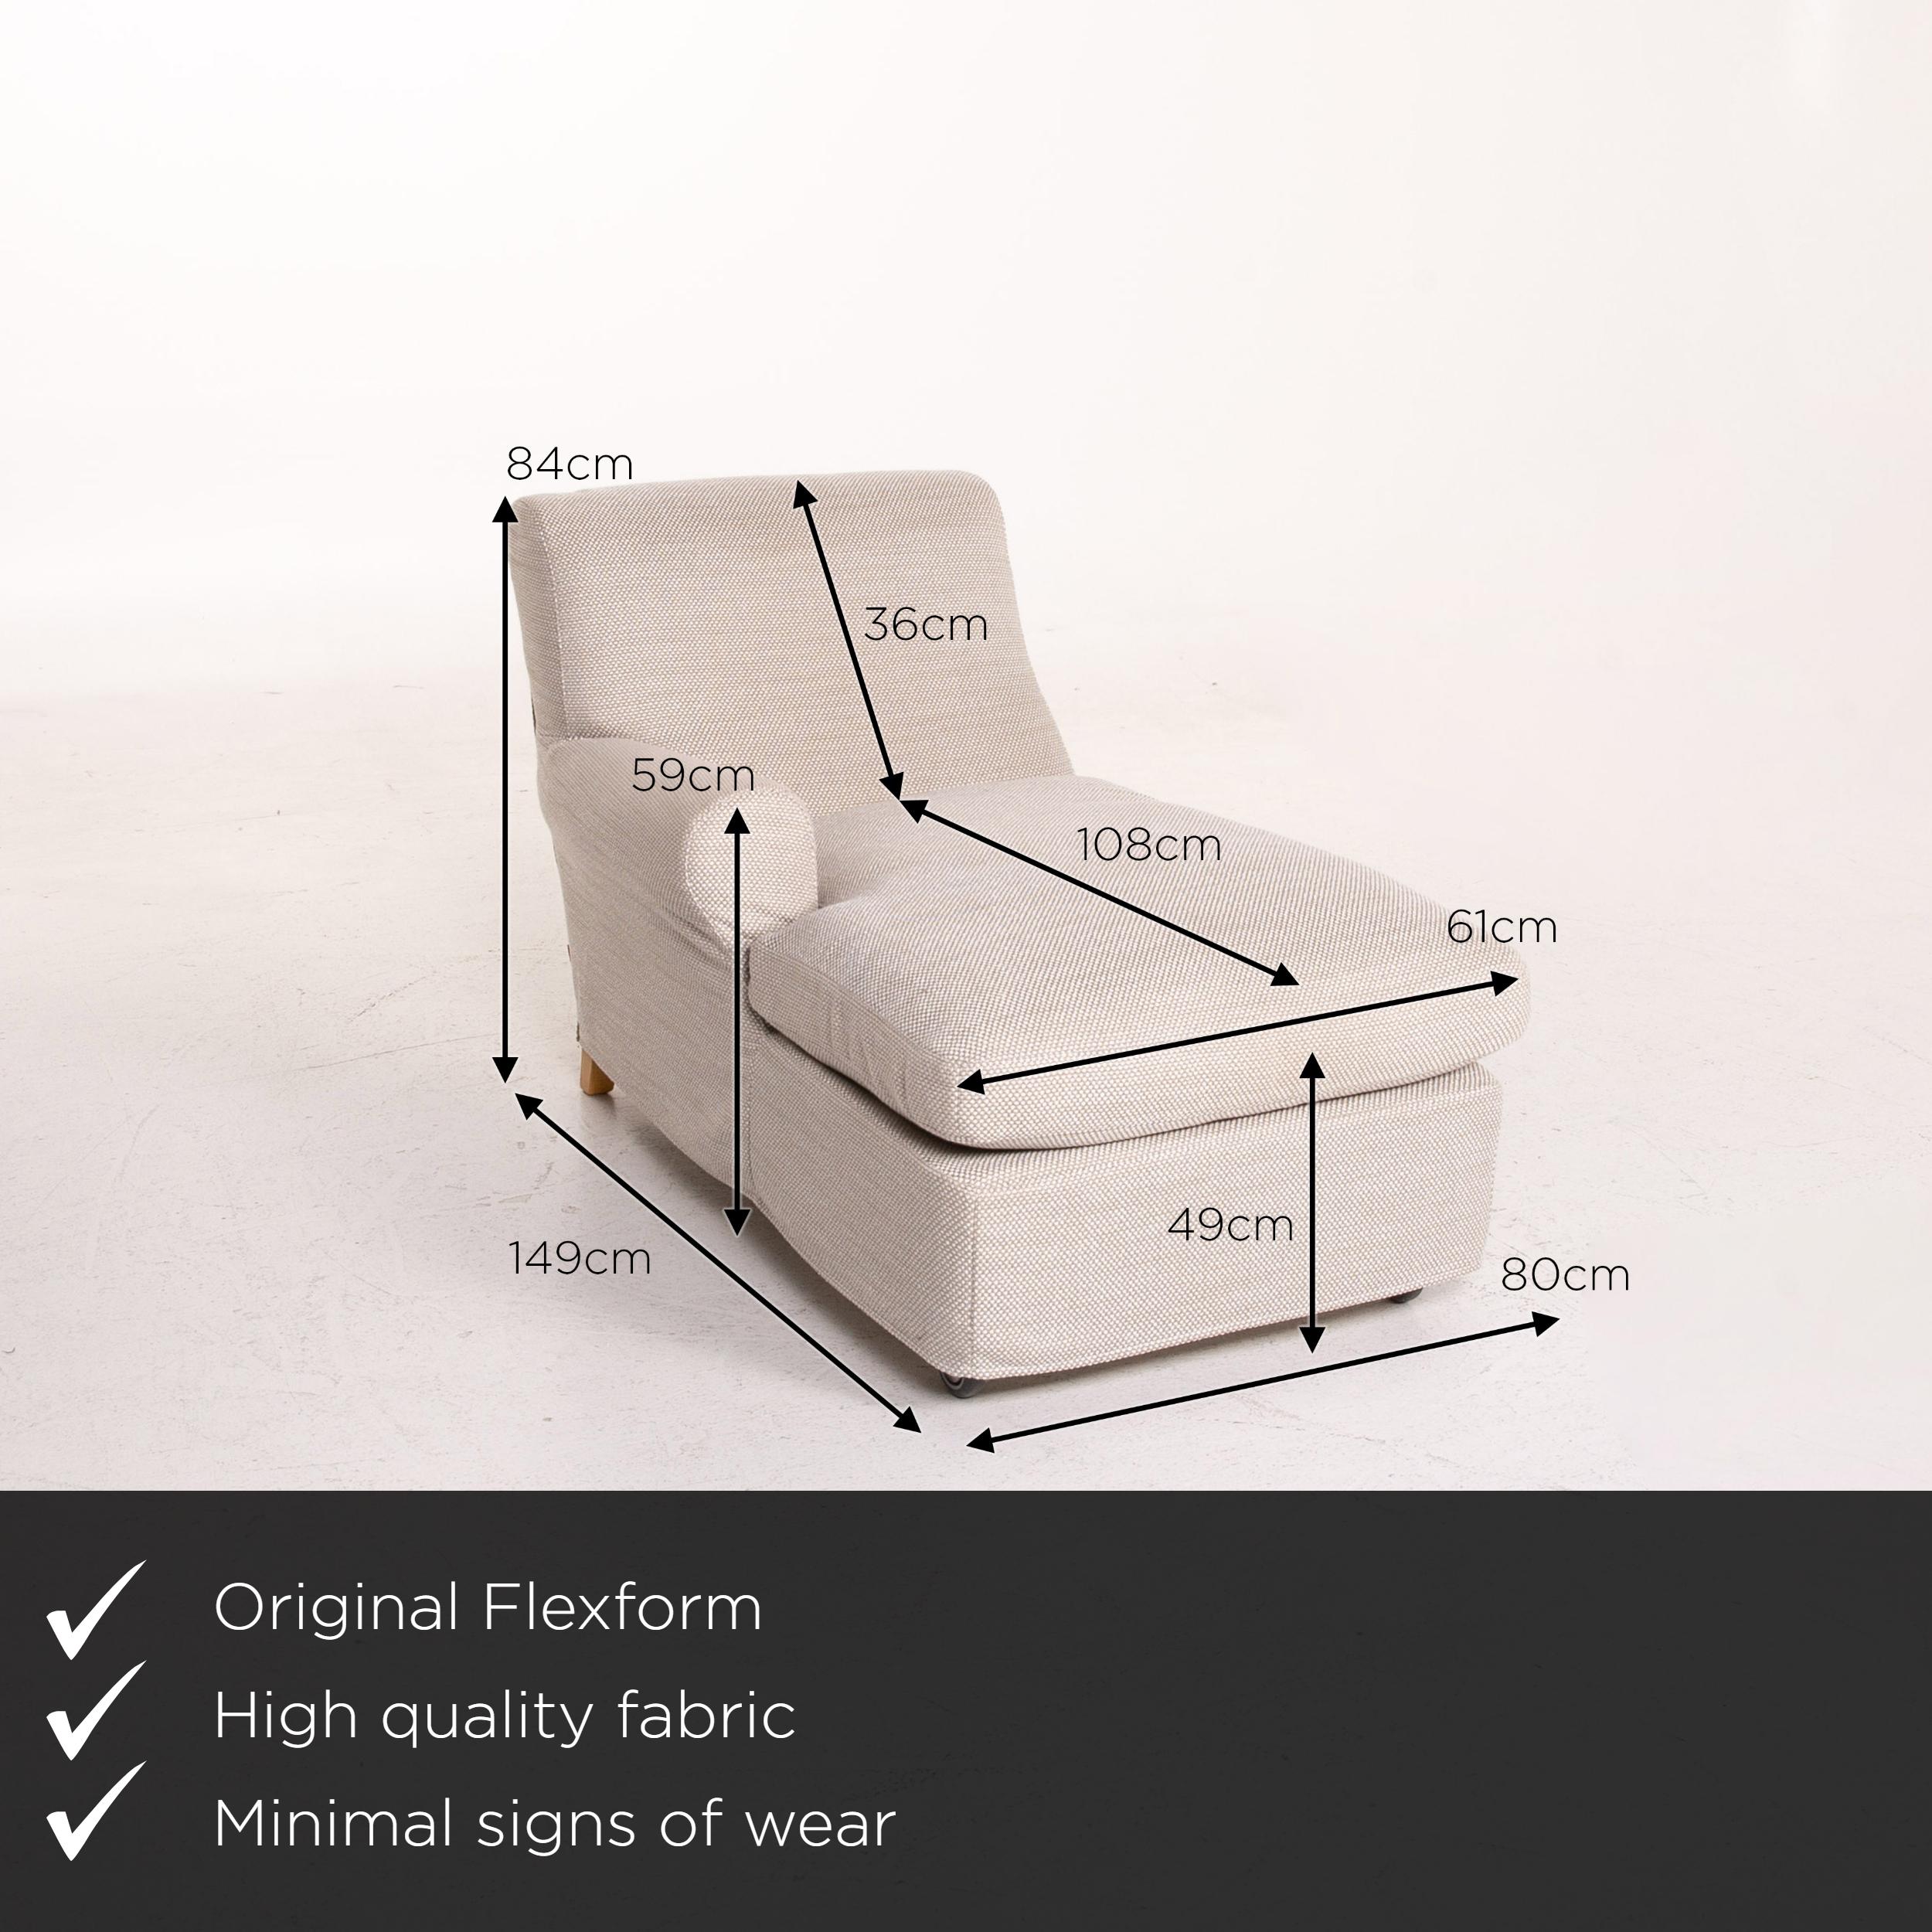 We present to you a Flexform Nonnamaria fabric lounger beige gray beige chaise longue dormeuse.
 
 

 Product measurements in centimeters:
 

Depth 149
Width 80
Height 84
Seat height 49
Rest height 59
Seat depth 108
Seat width 61
Back